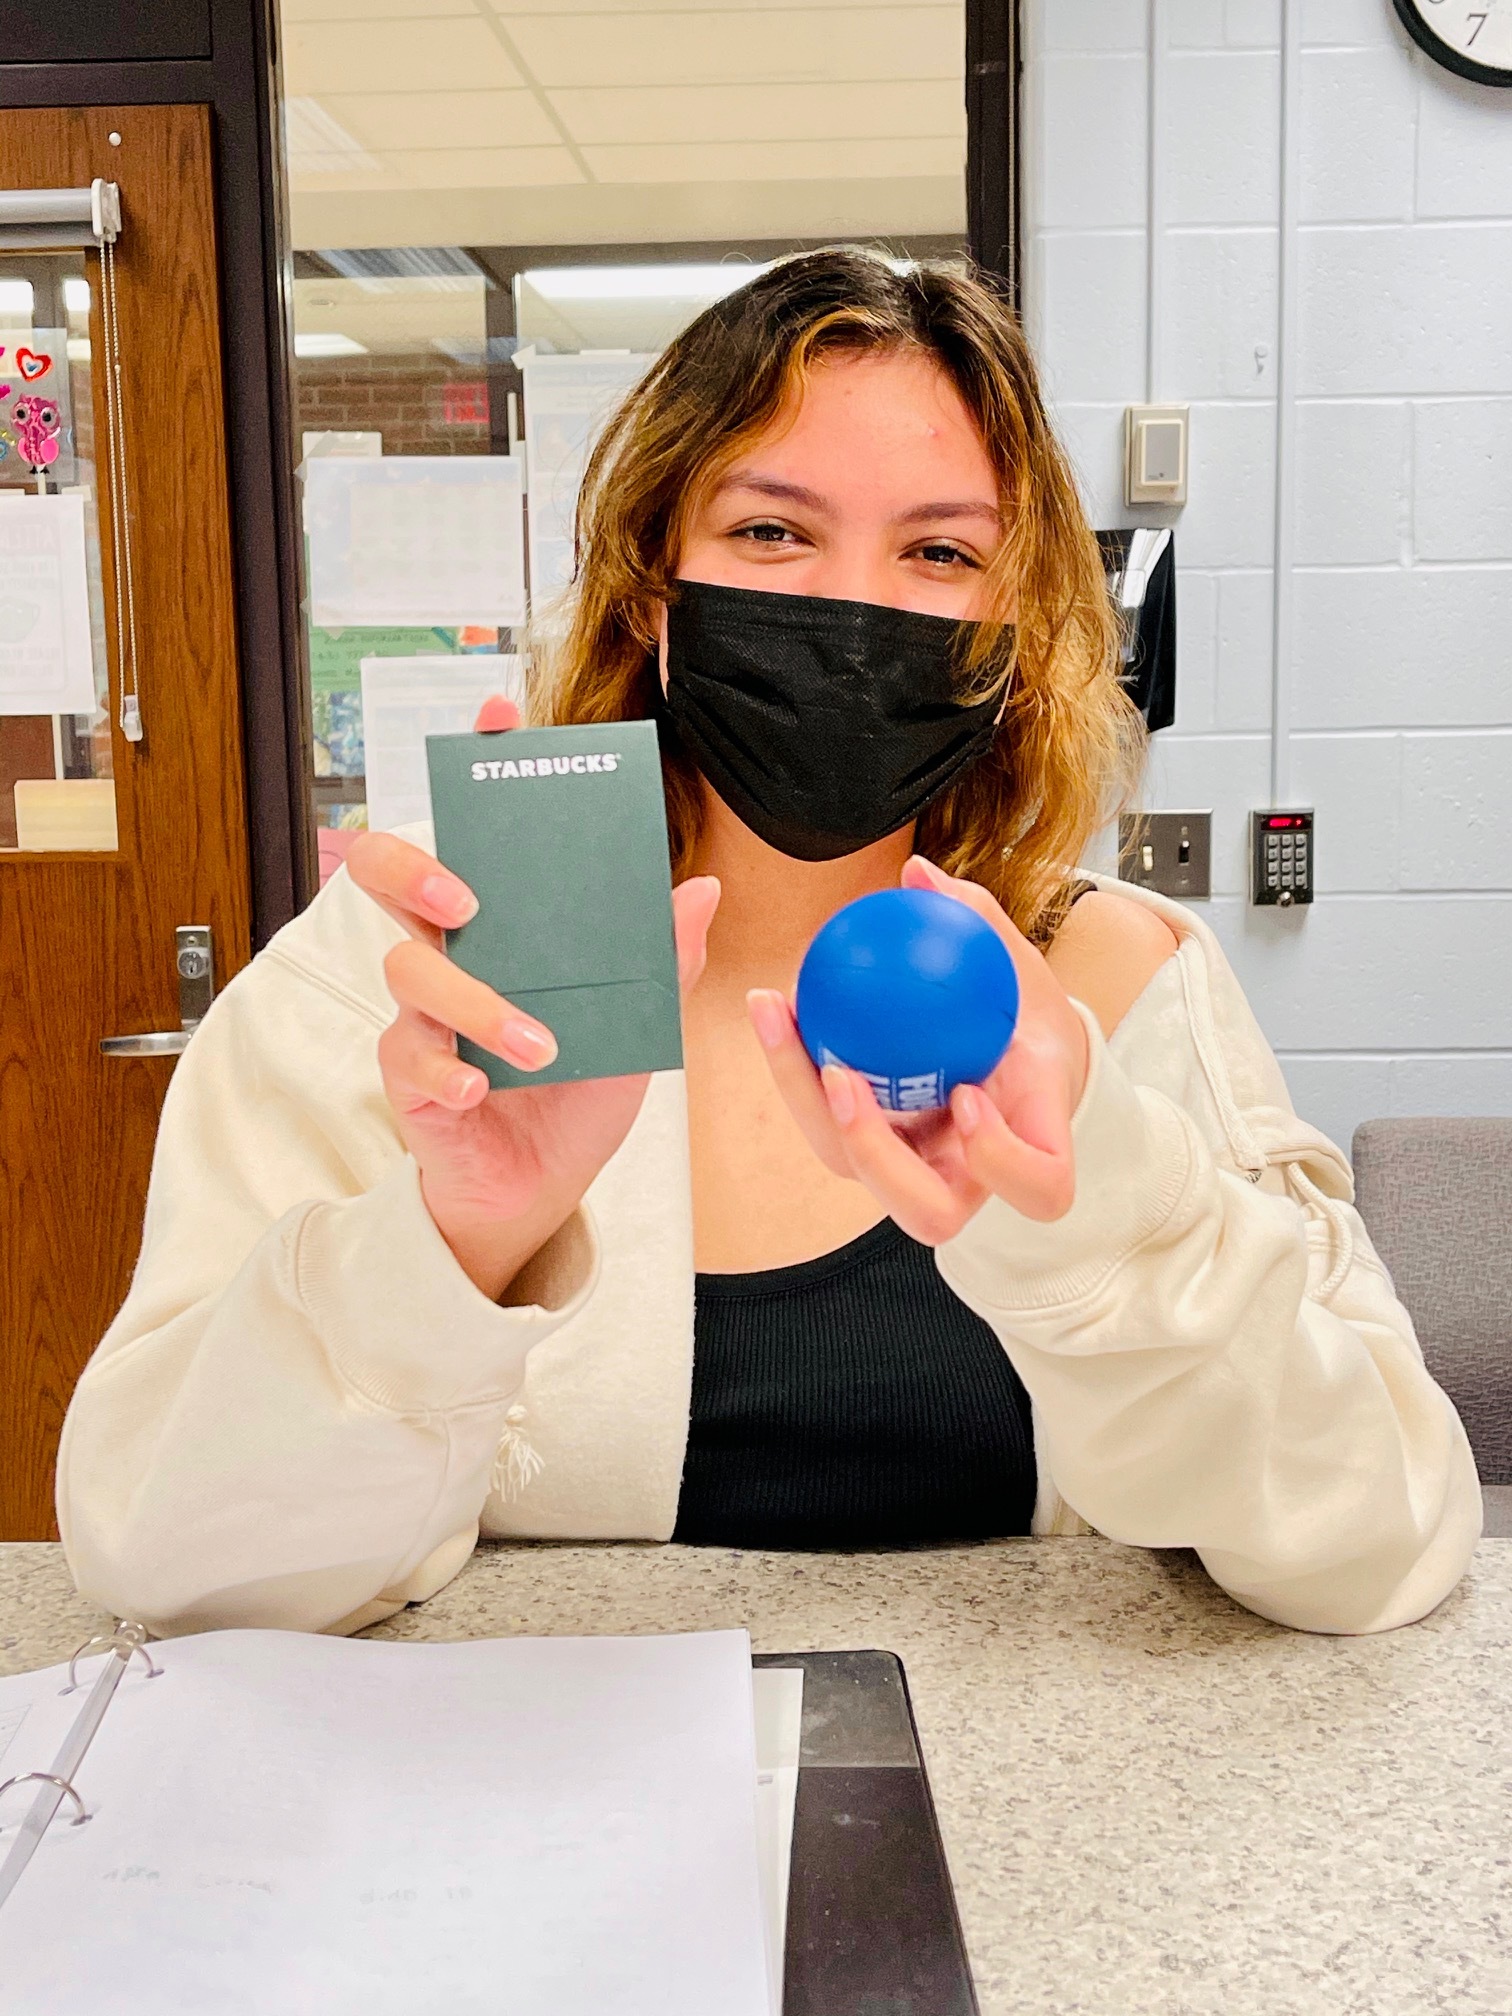 Maria Hill found a blue stress ball hidden within Southampton High School and won a gift card to Starbucks.